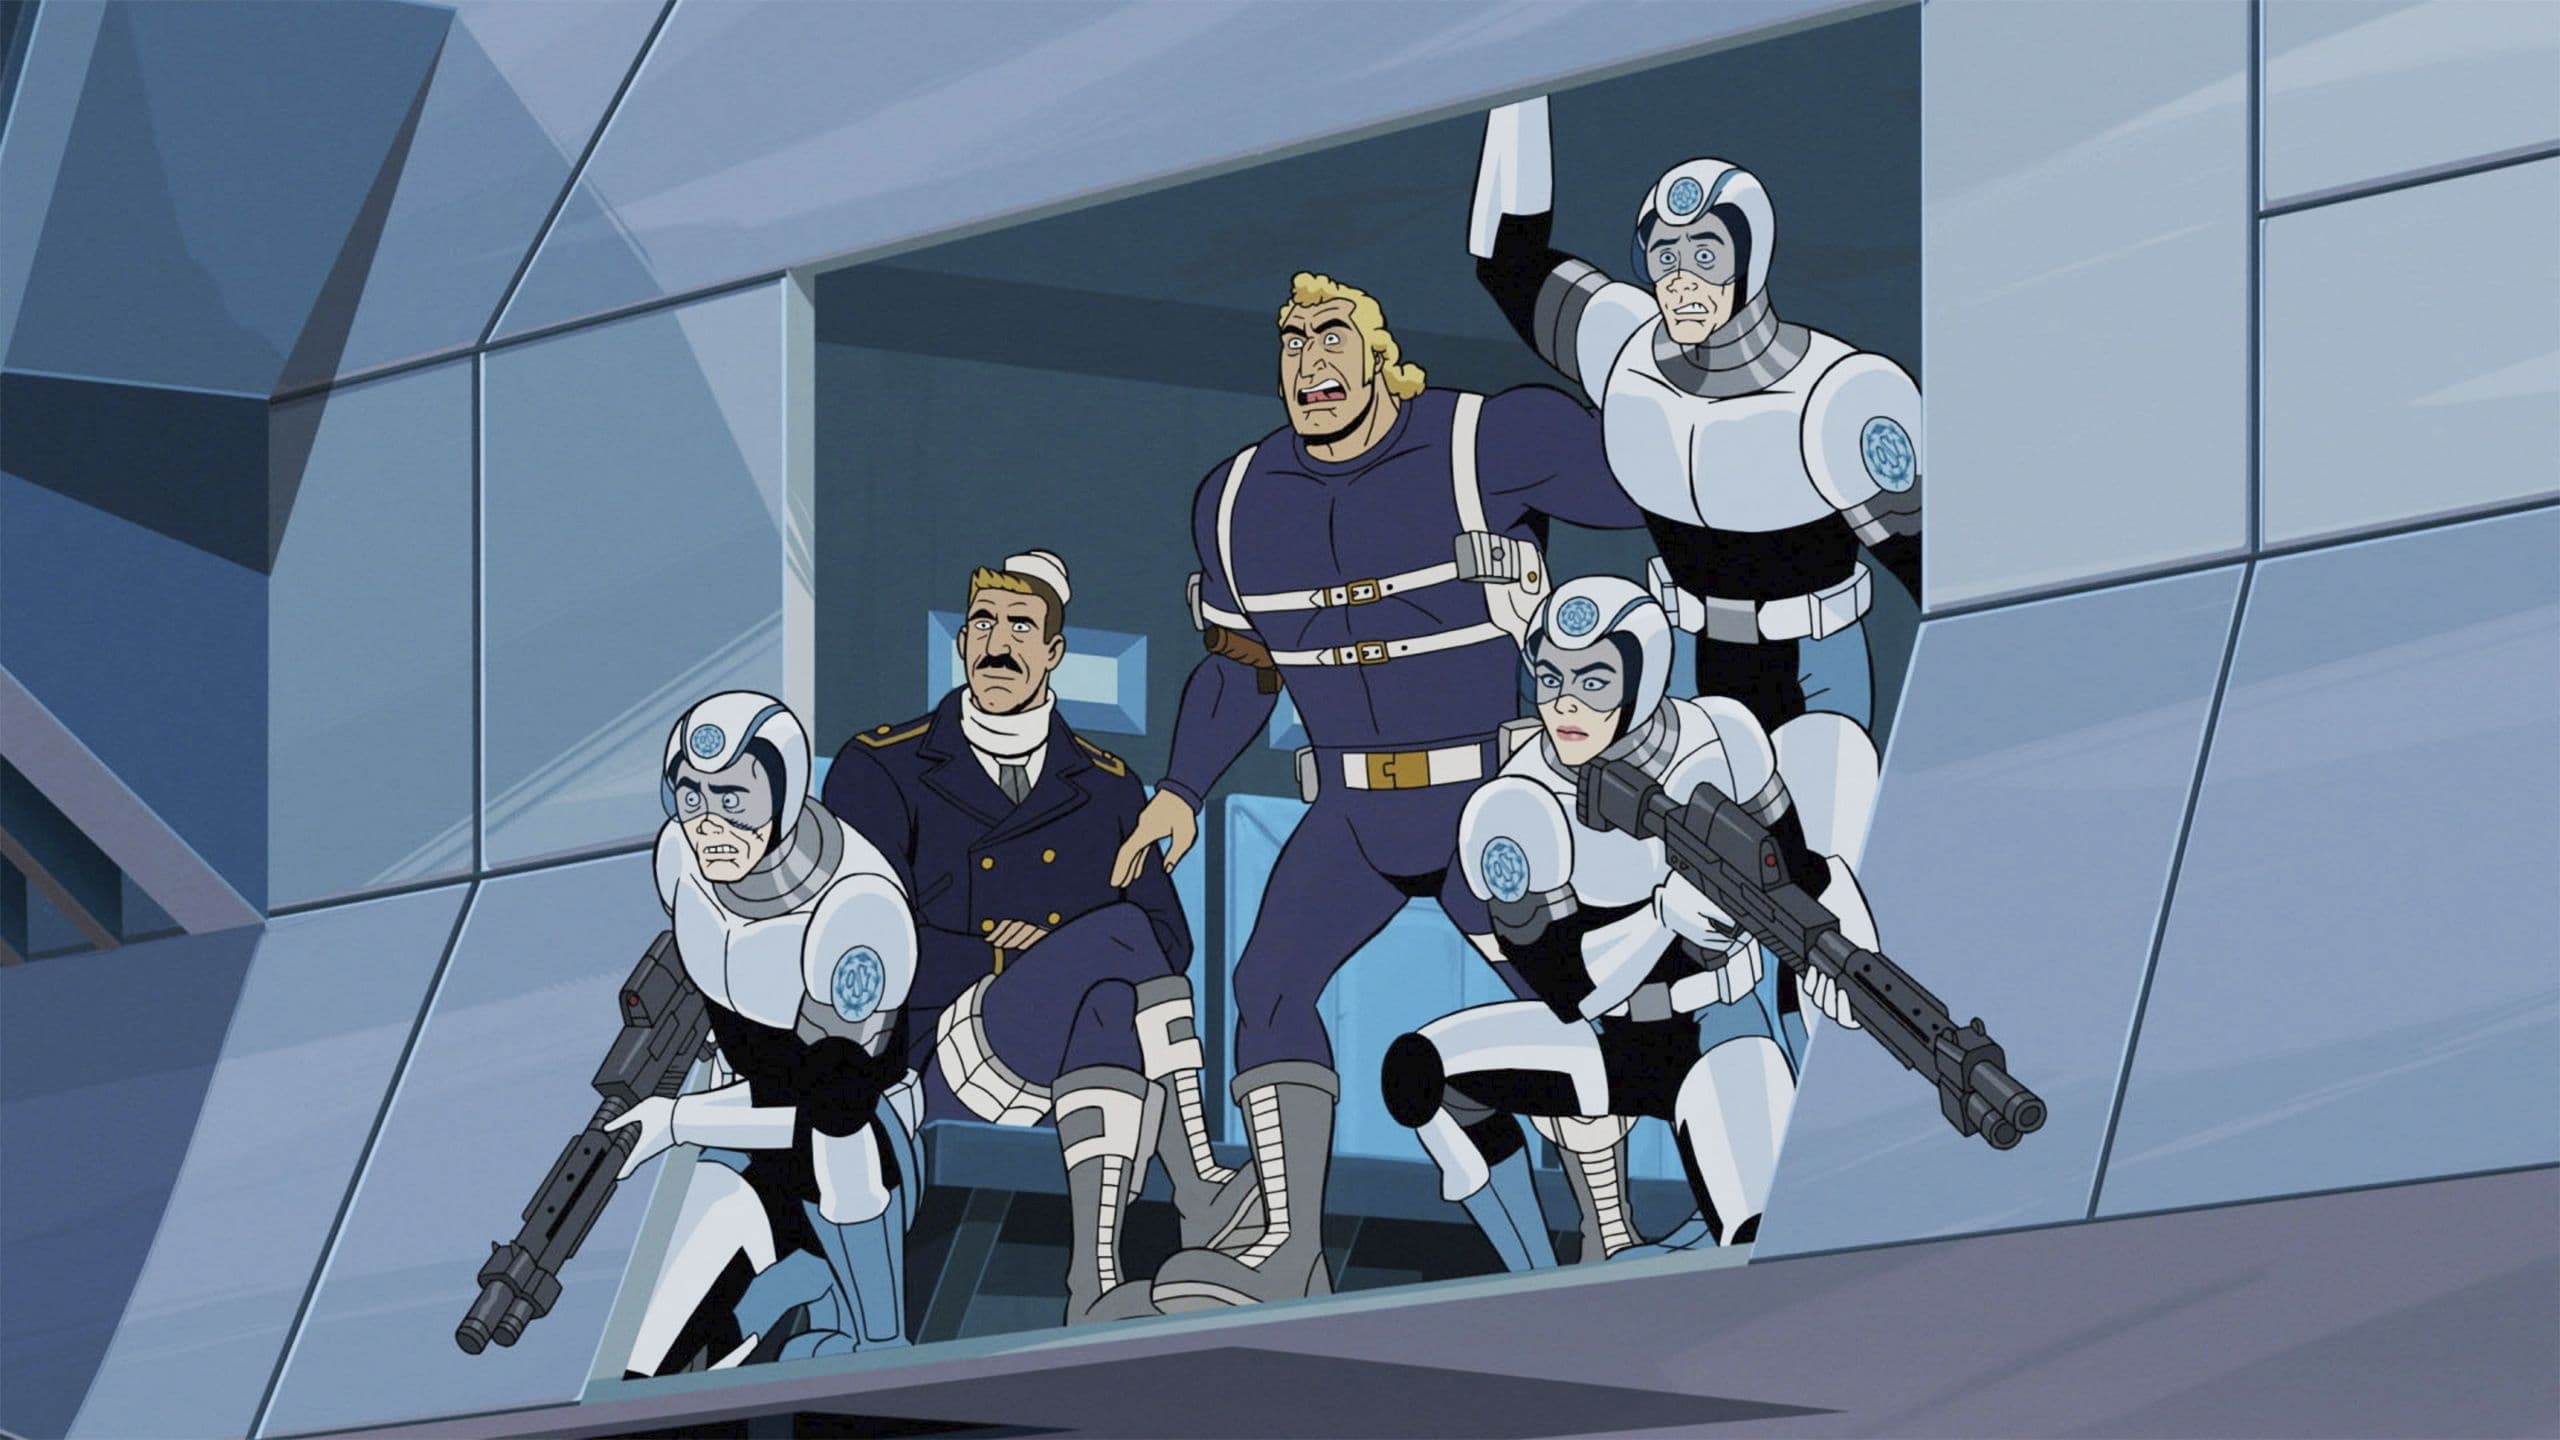 The Venture Bros.: Radiant Is the Blood of the Baboon Heart (2023)